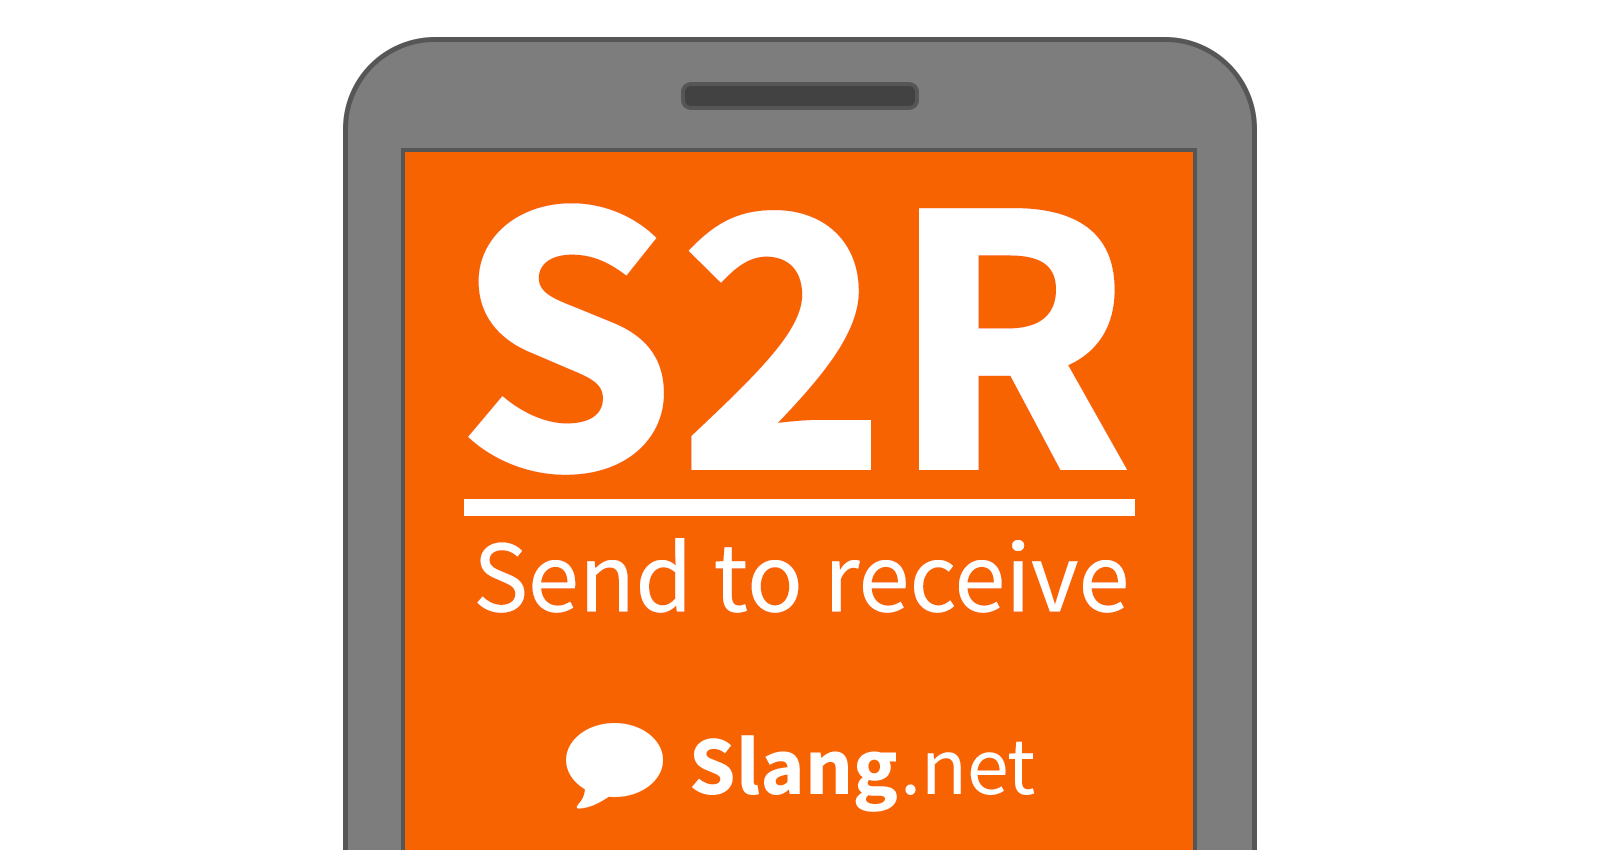 You may receive S2R when people are looking to swap pictures